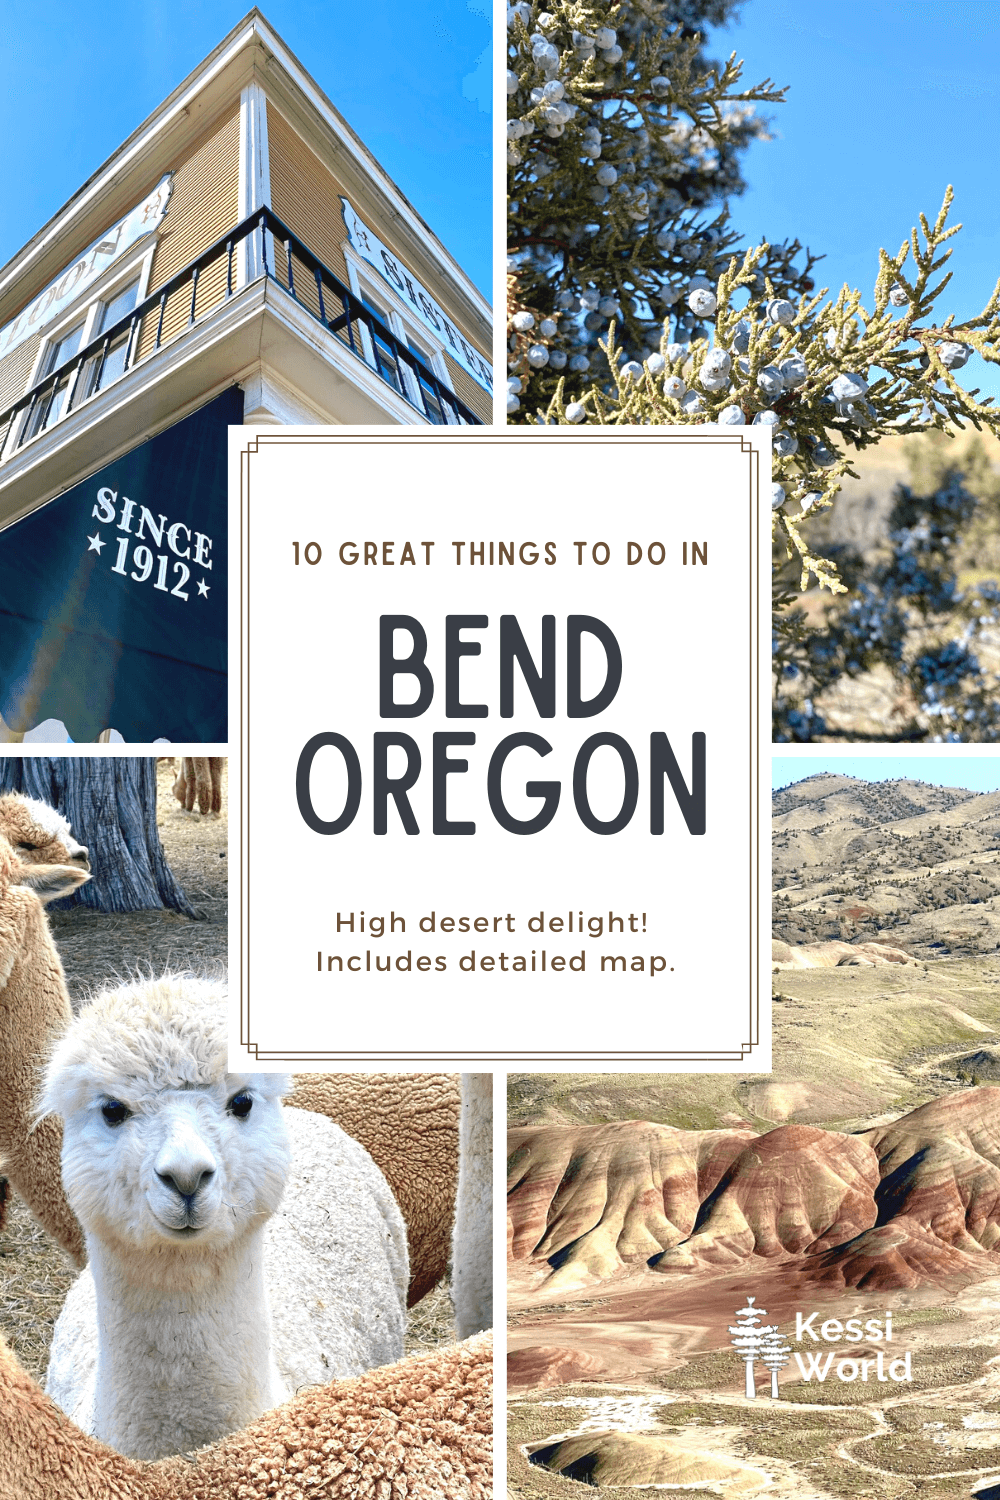 This Pinterest Pin has four tiles with different things to do in Bend, Oregon and includes a picture of a cute white Alpaca, the Painted Hills, juniper berries and an old historic saloon. 